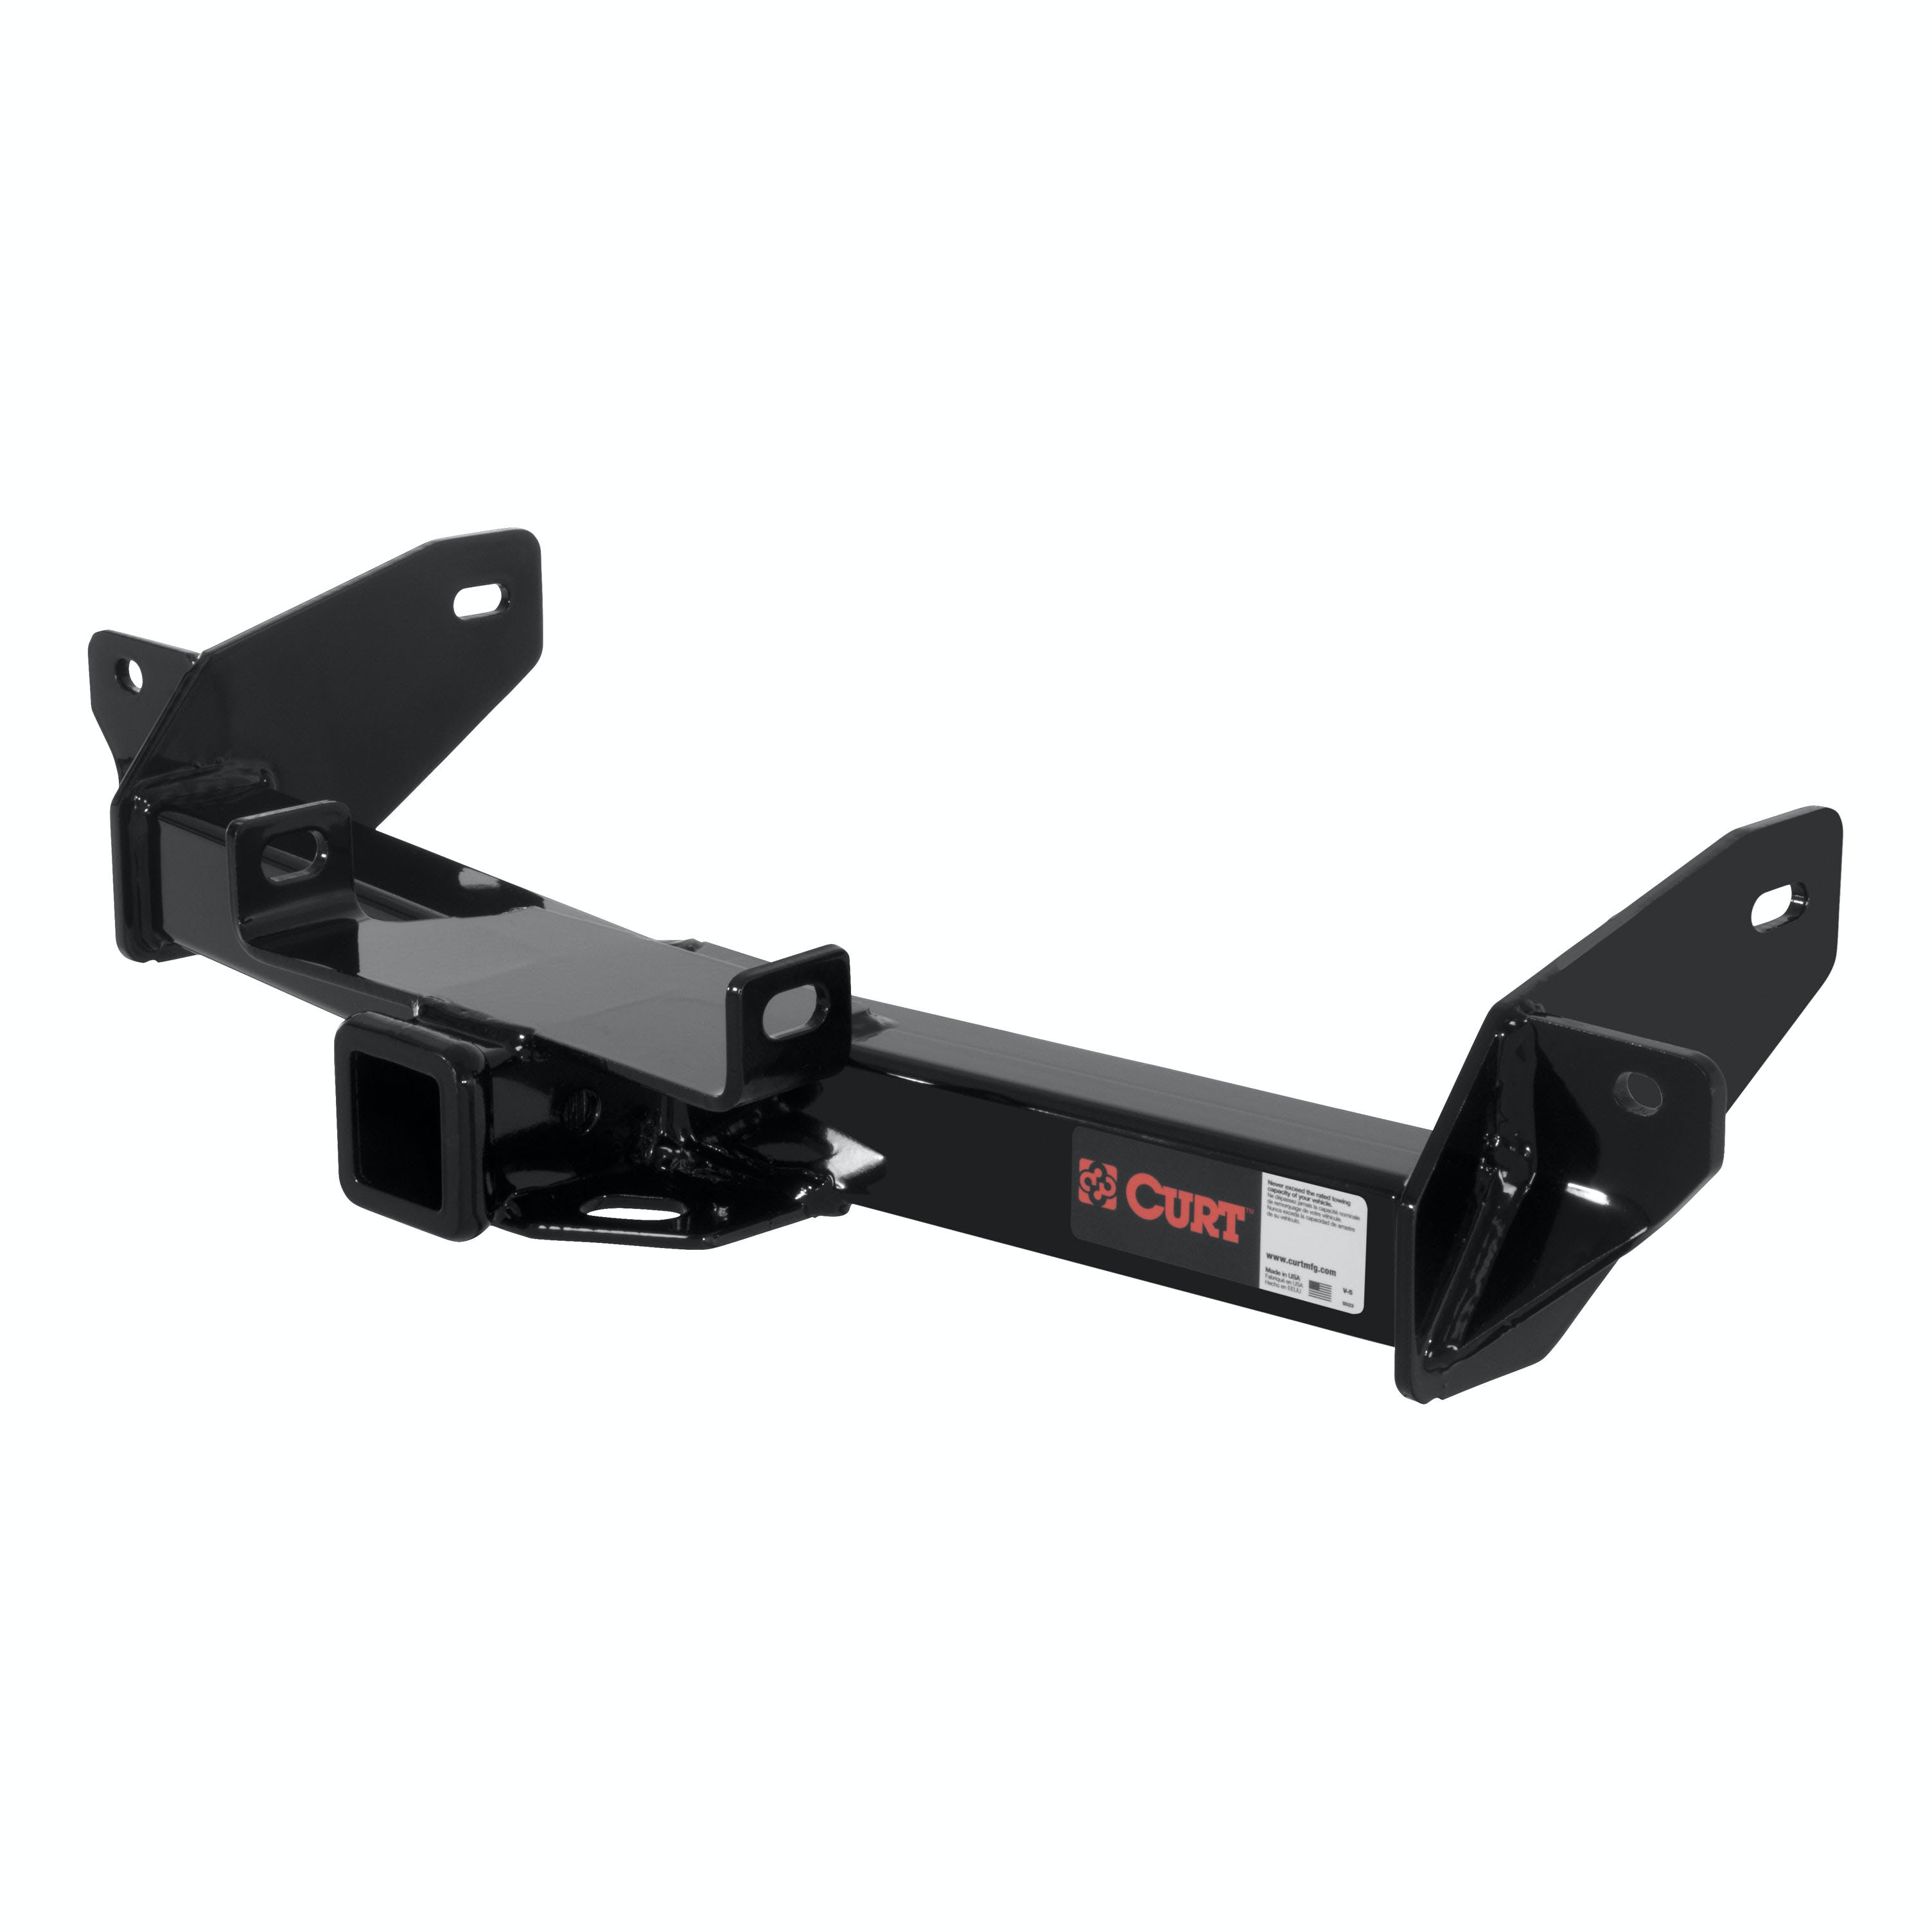 CURT 13360 Class 3 Hitch, 2, Select Ford F-150, Lincoln Mark LT (Square Tube Frame)